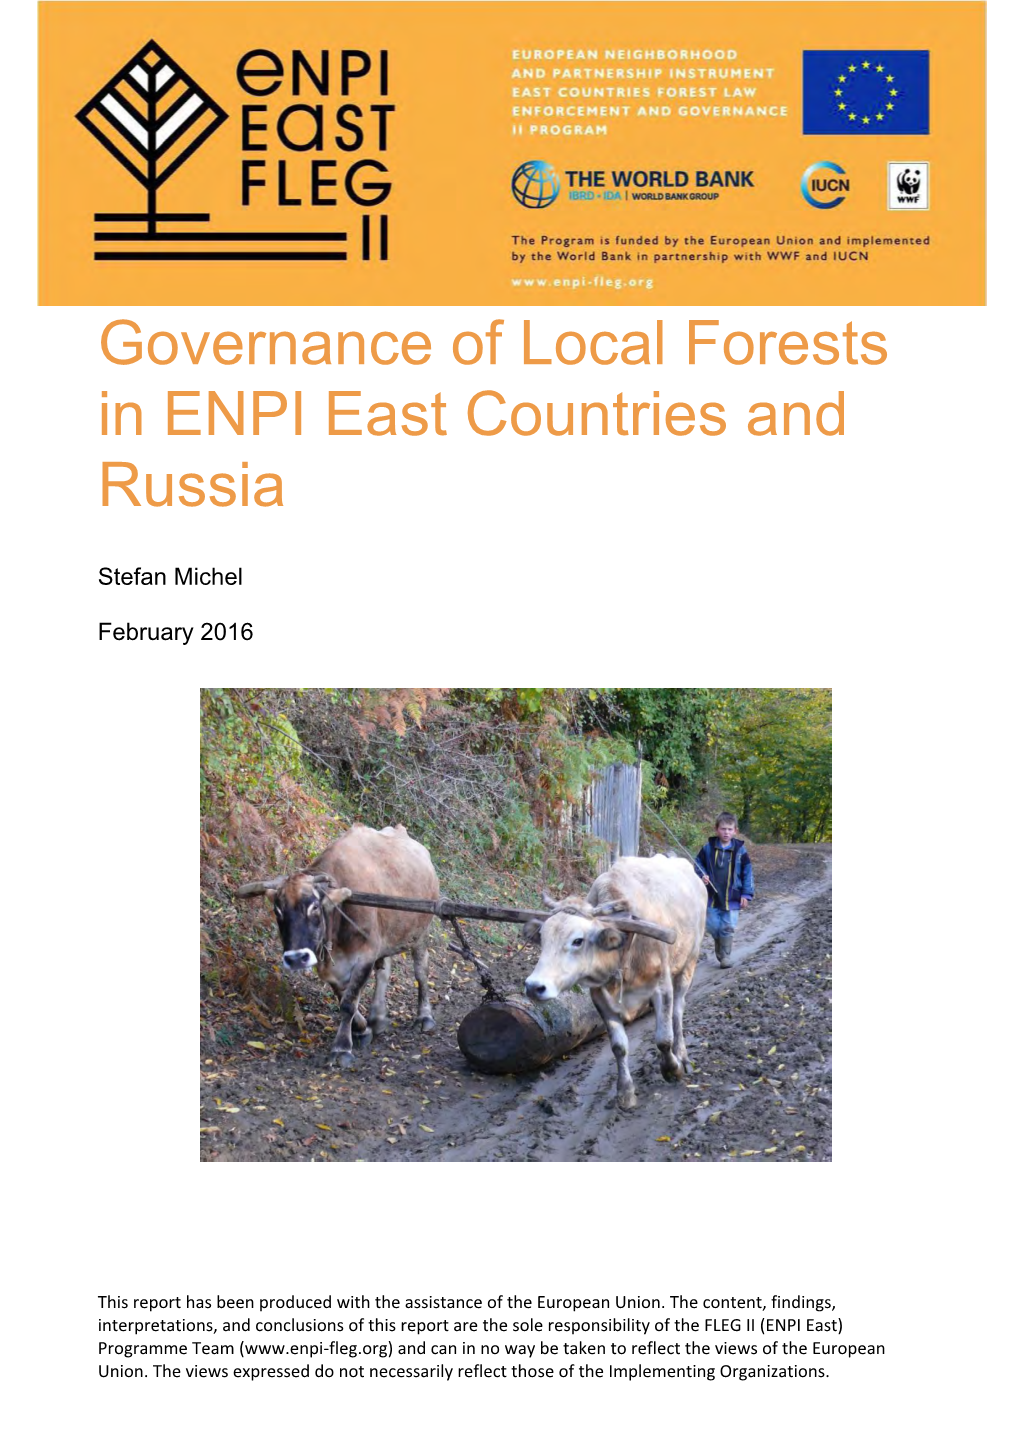 Governance of Local Forests in ENPI East Countries and Russia